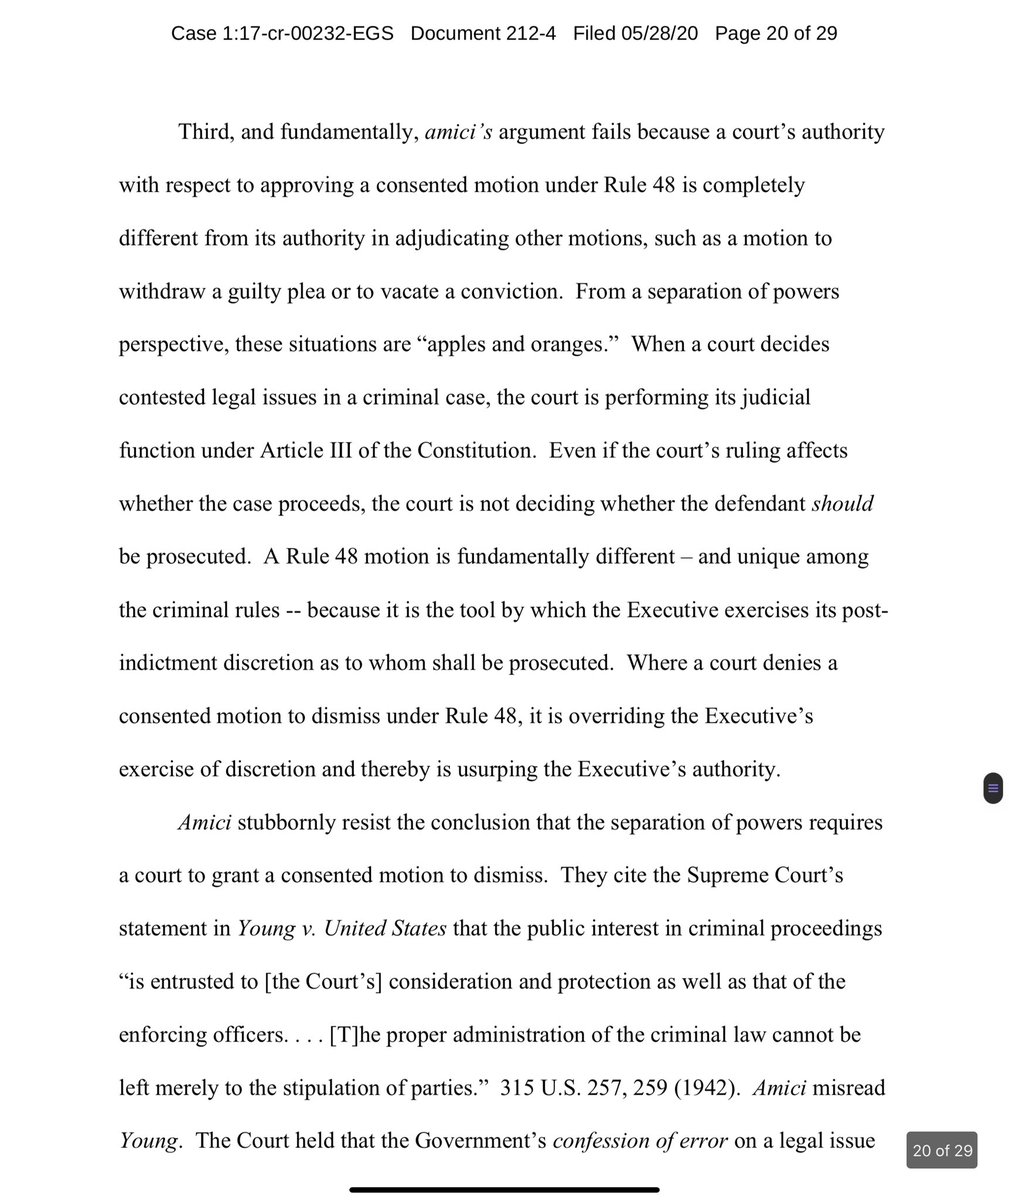 Breaking! All of the good guys have just entered amicus on behalf of  @GenFlynn! Including,  @McAdooGordon  @ProfMJCleveland  @RonColeman  @TGowdySC and more! Reading now.